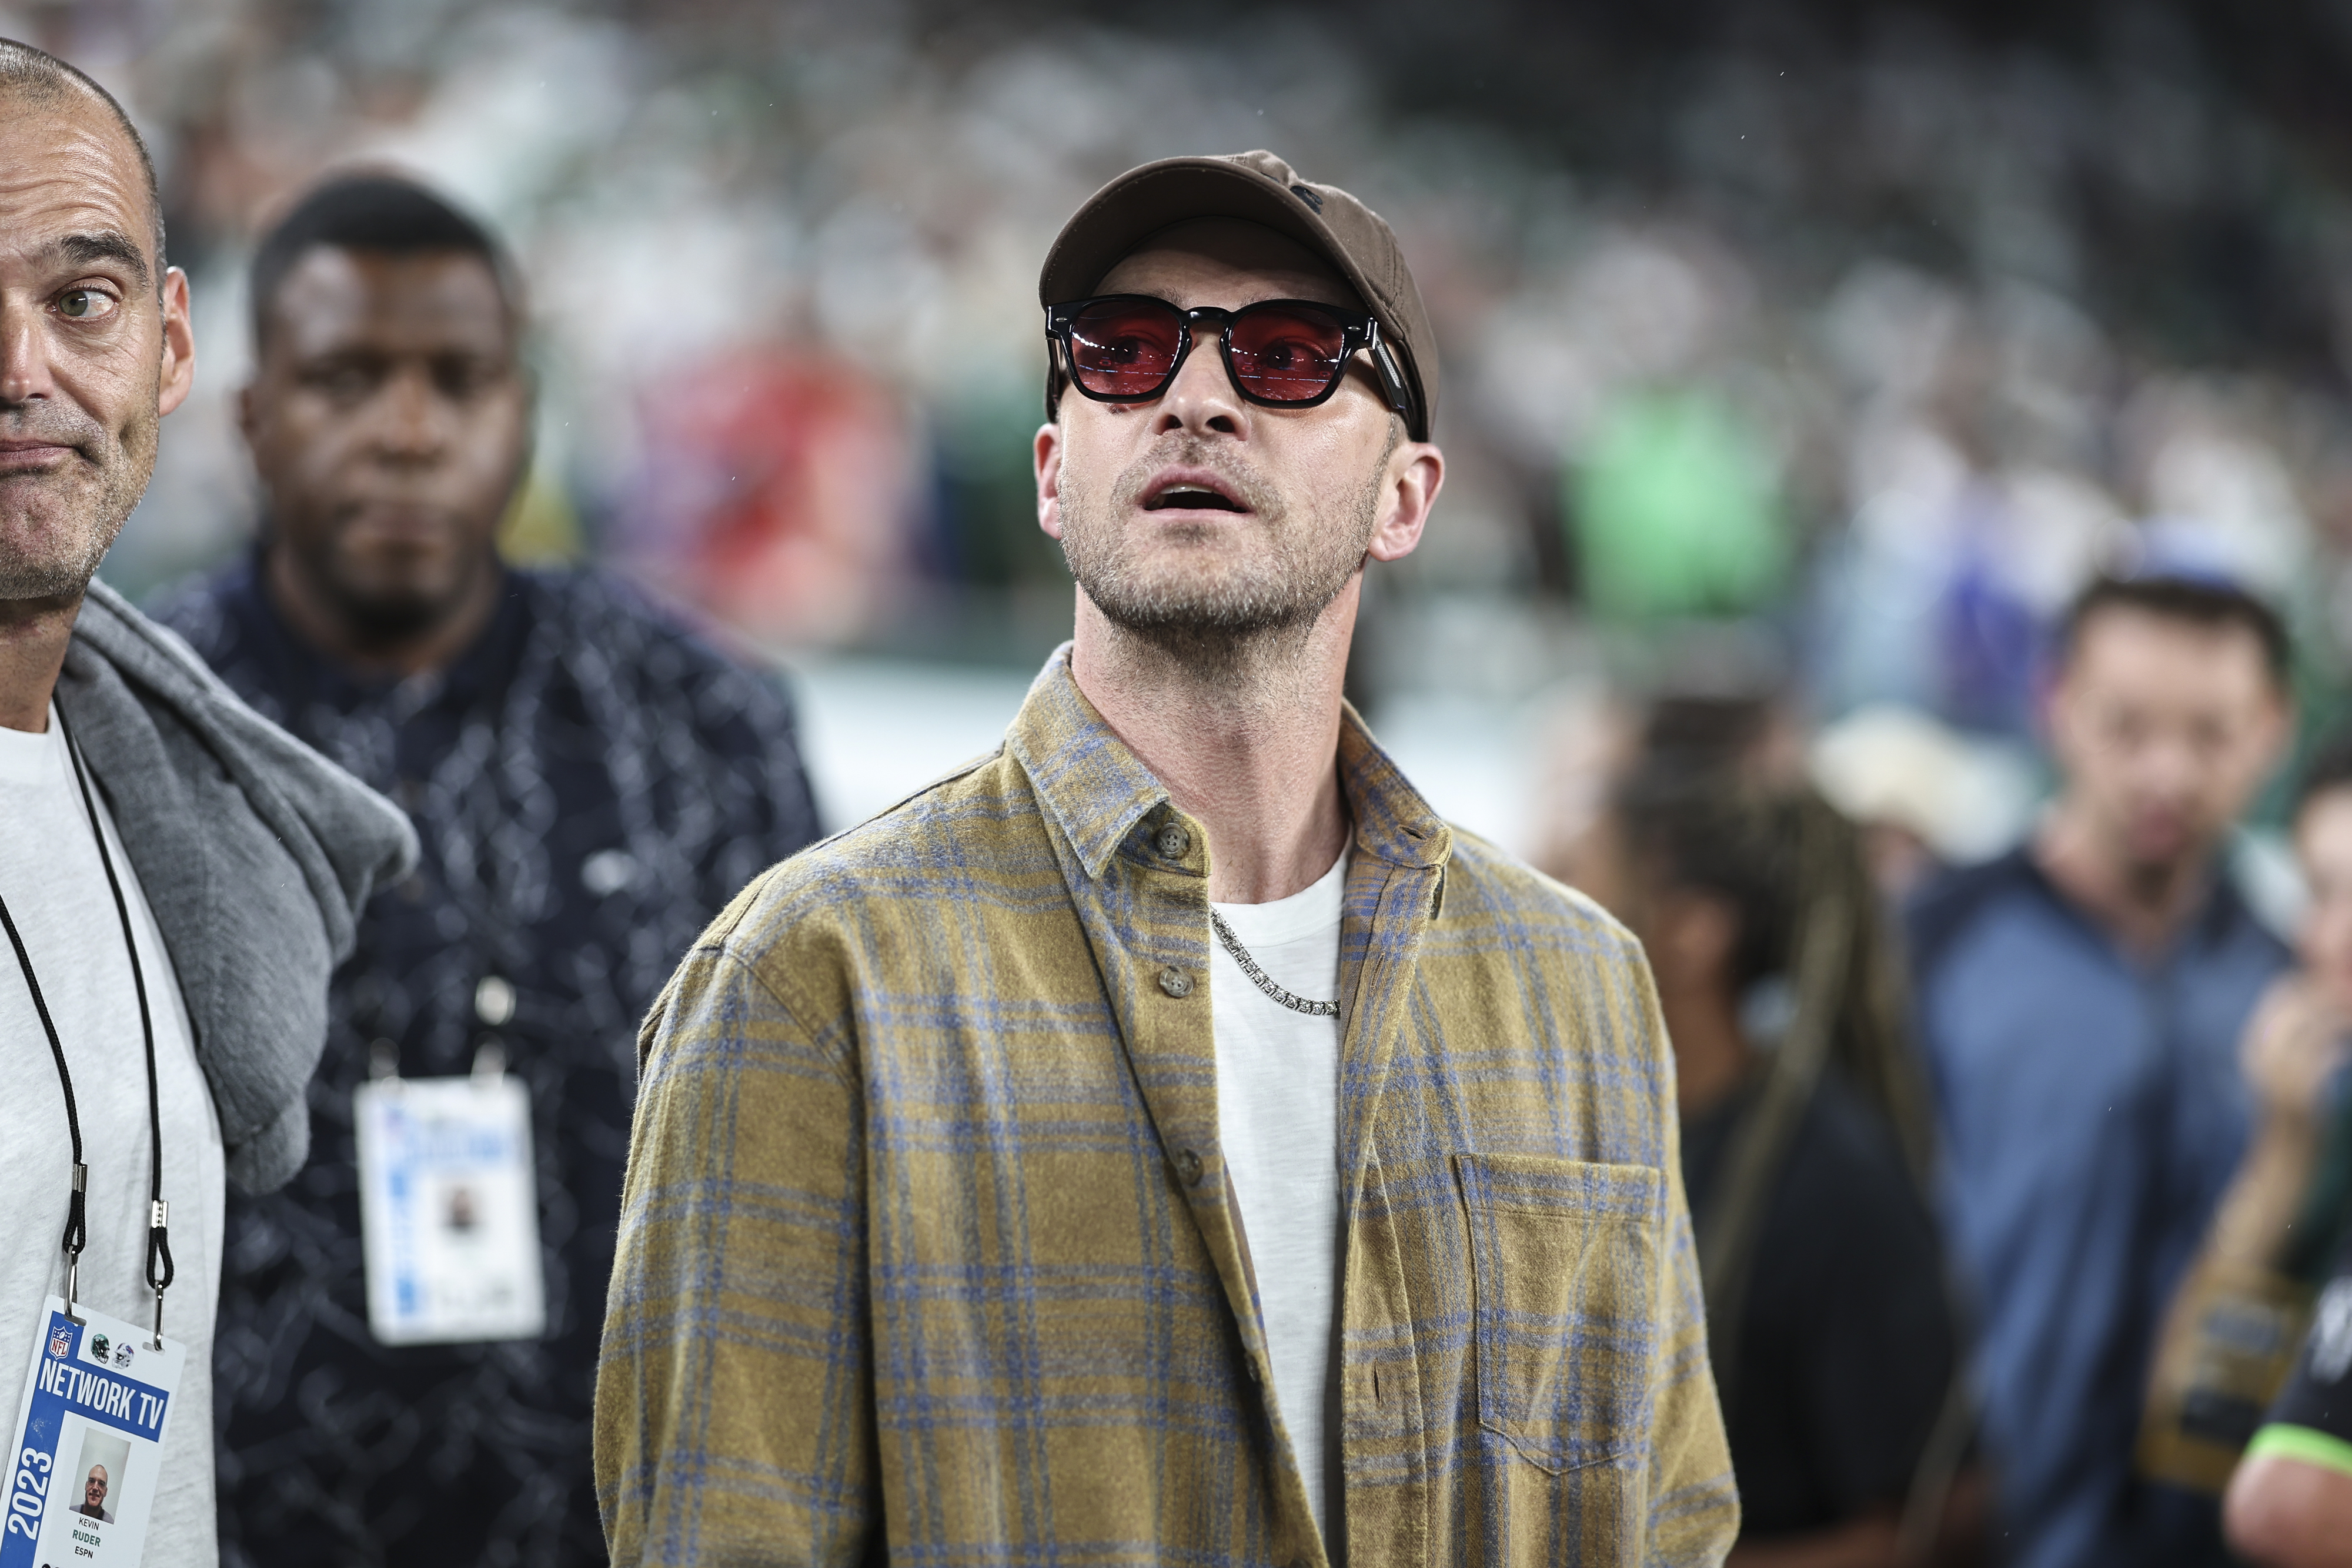 Justin Timberlake wearing a plaid jacket and sunglasses at a sporting event